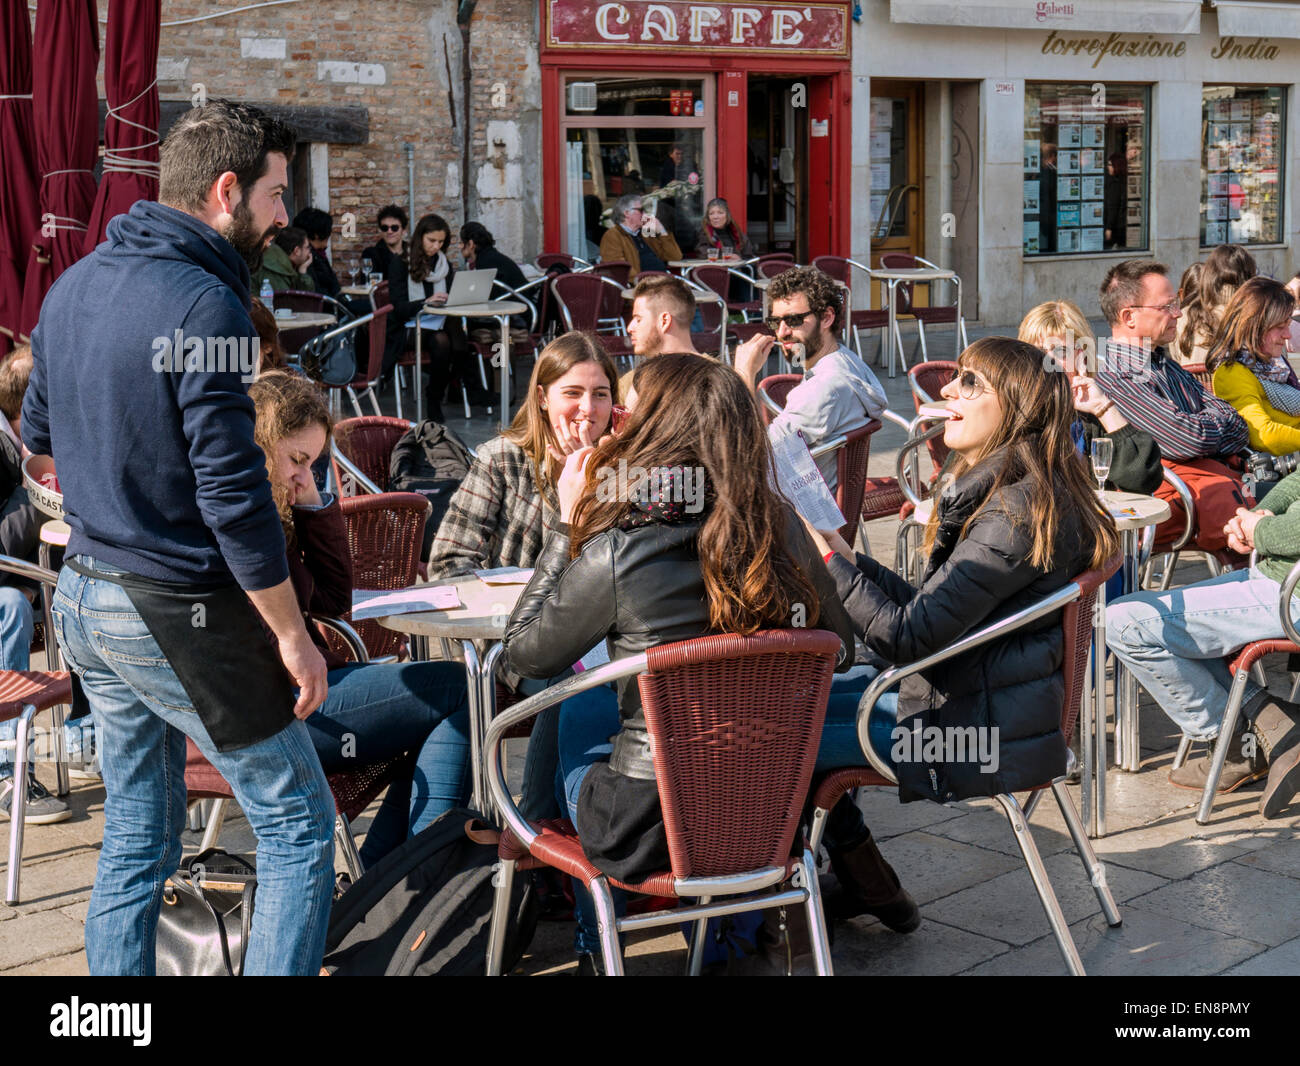 People enjoying food & drink at an outdoor cafe, Venice, Italy Stock Photo